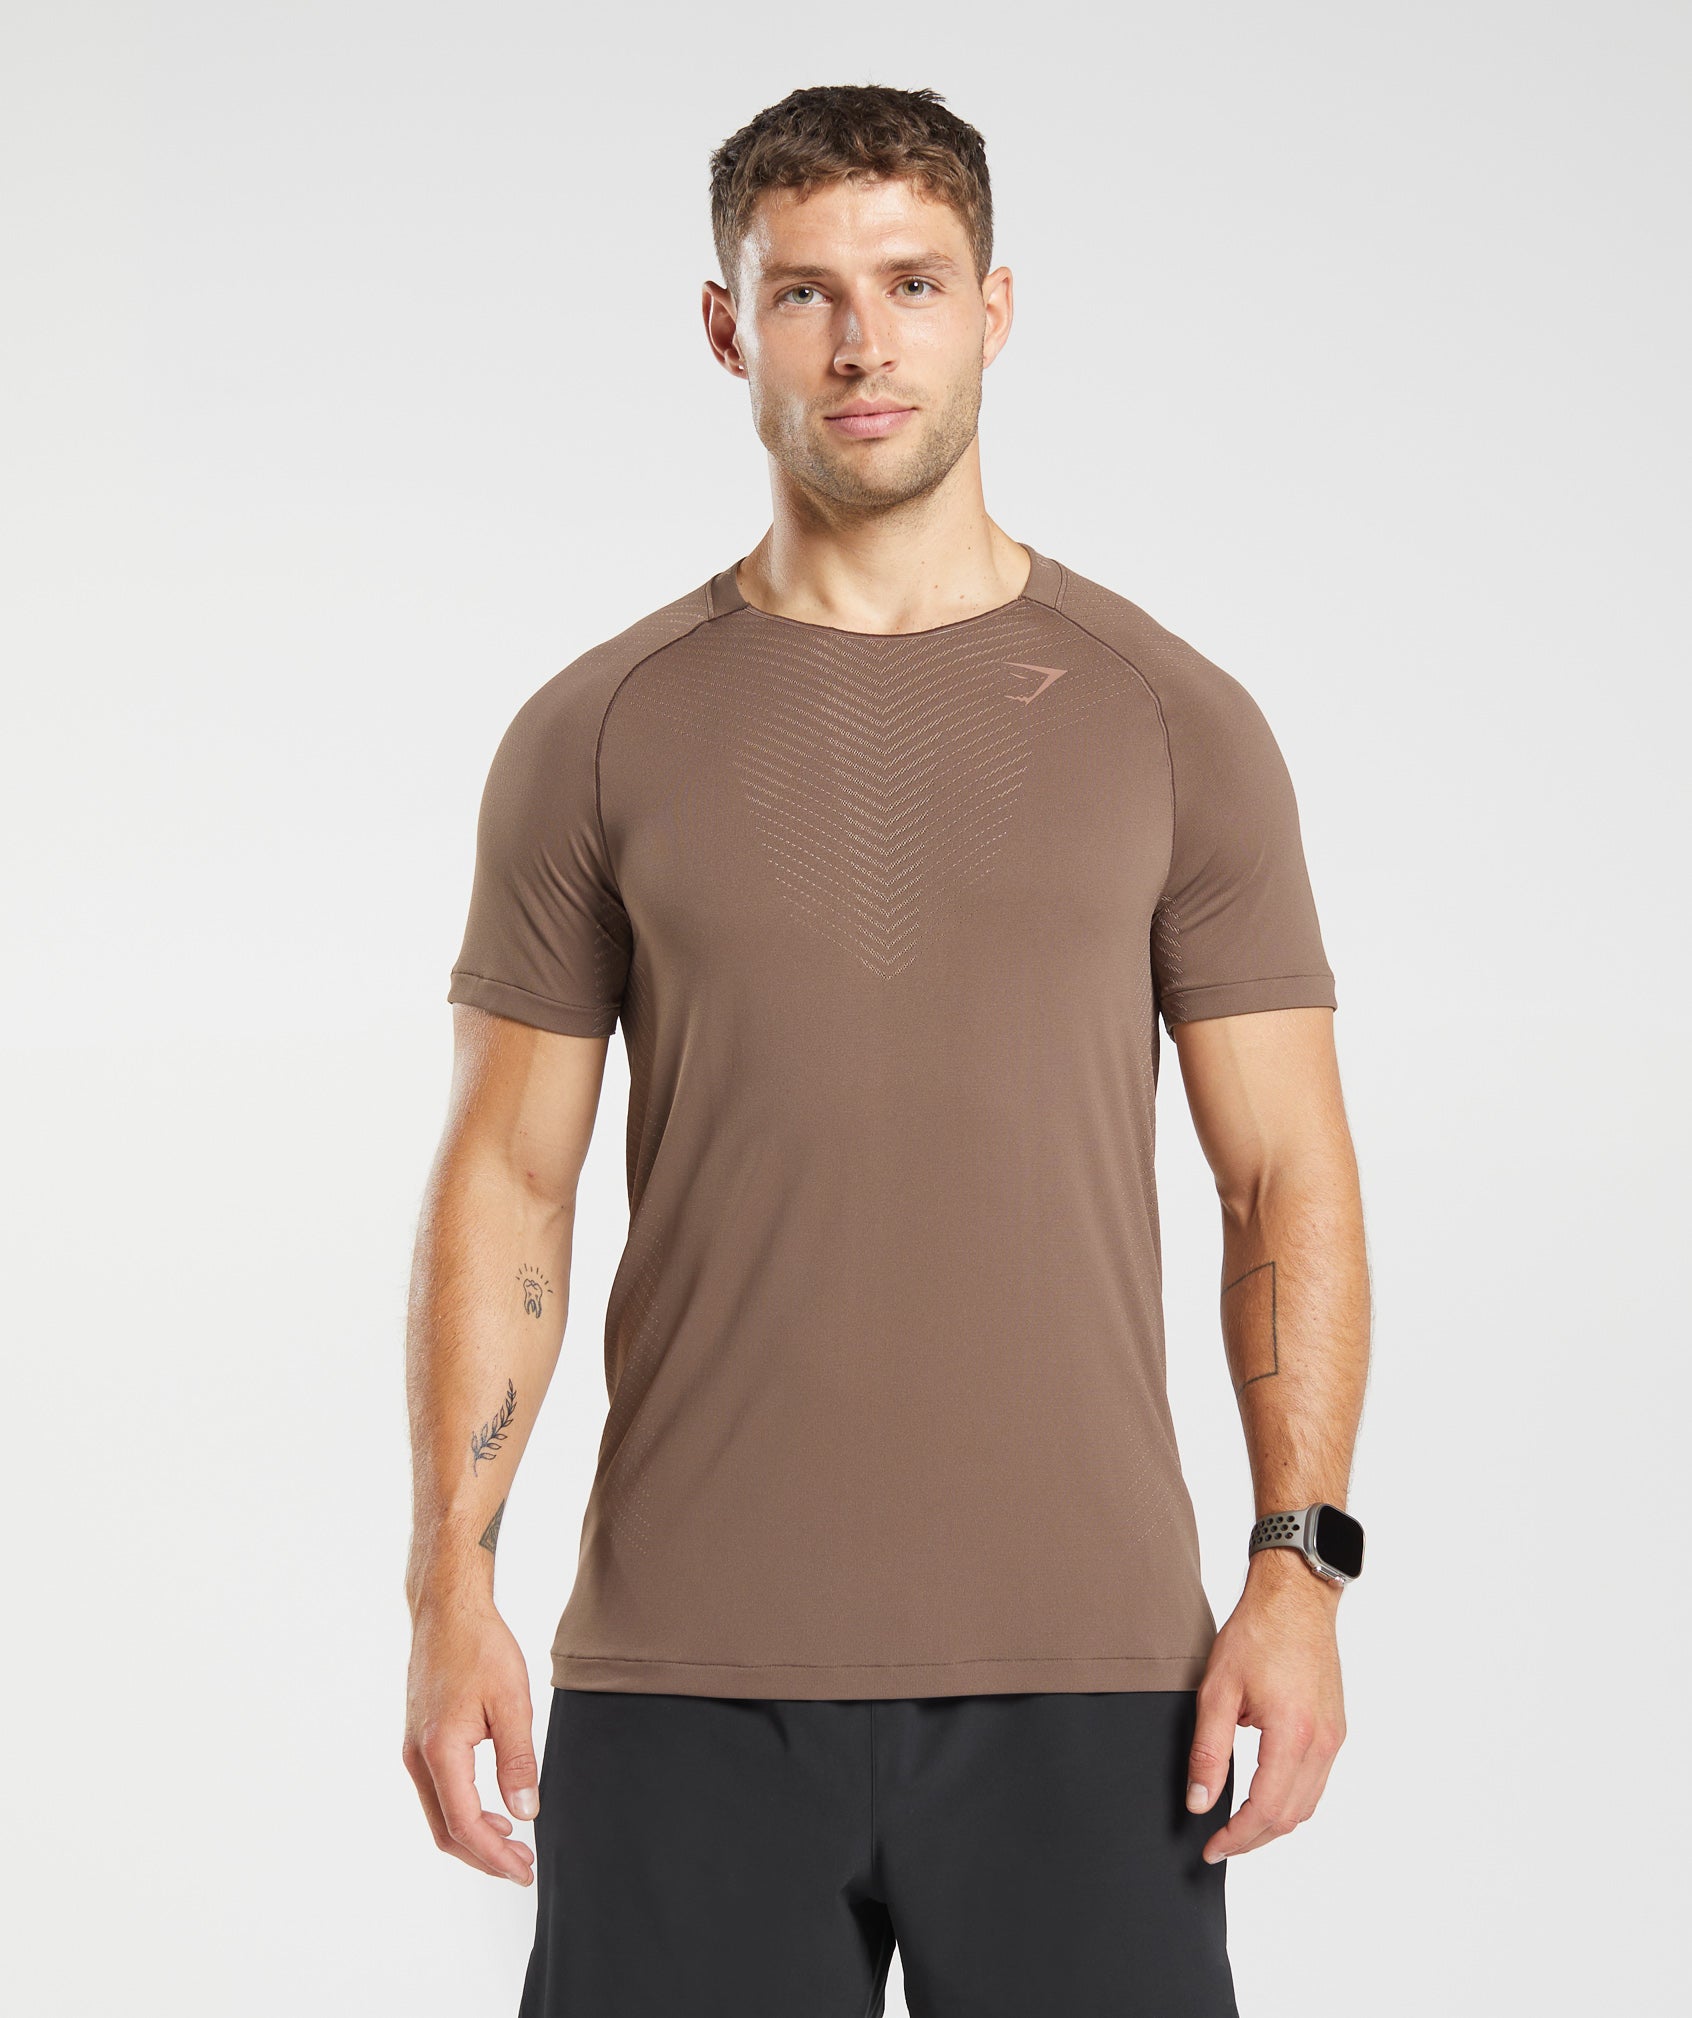 Apex Seamless T-Shirt in Soft Brown/Taupe Brown - view 1